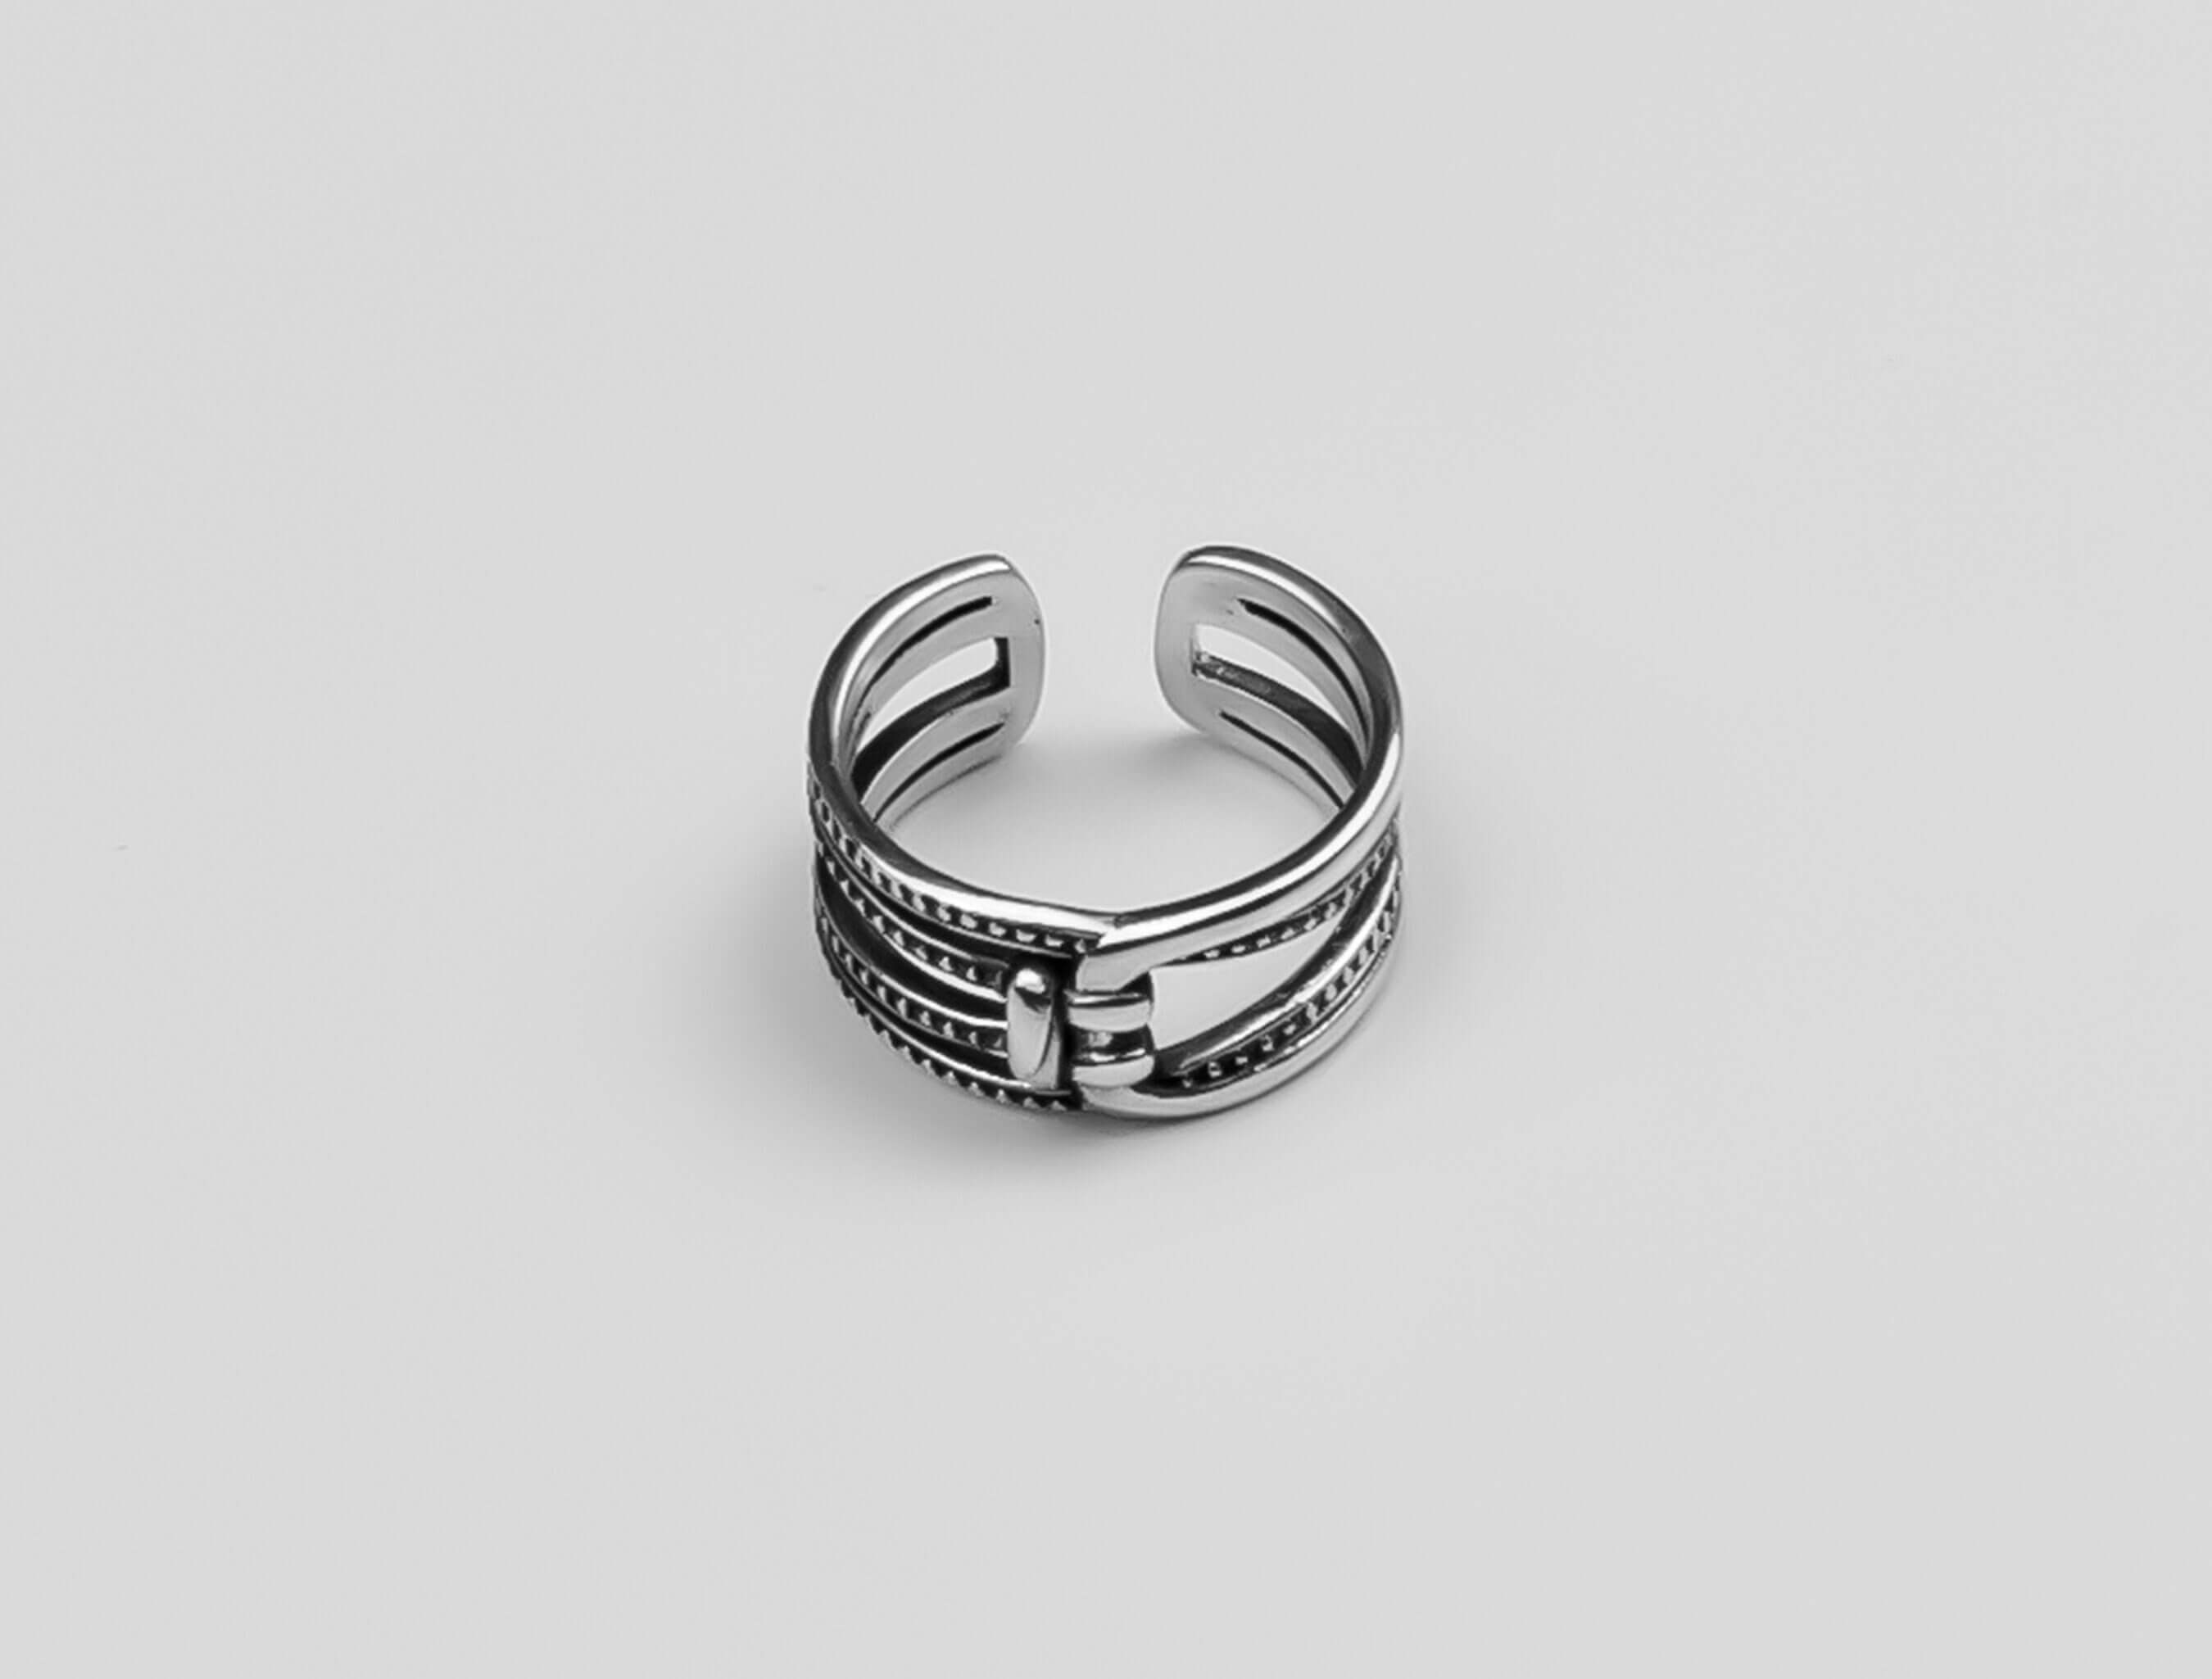 Classic Chunky Silver Ring, Boho Silver Ring, Adjustable Silver Ring, Best Gift for Her, Sterling Silver Unique Ring, Silver Open Band